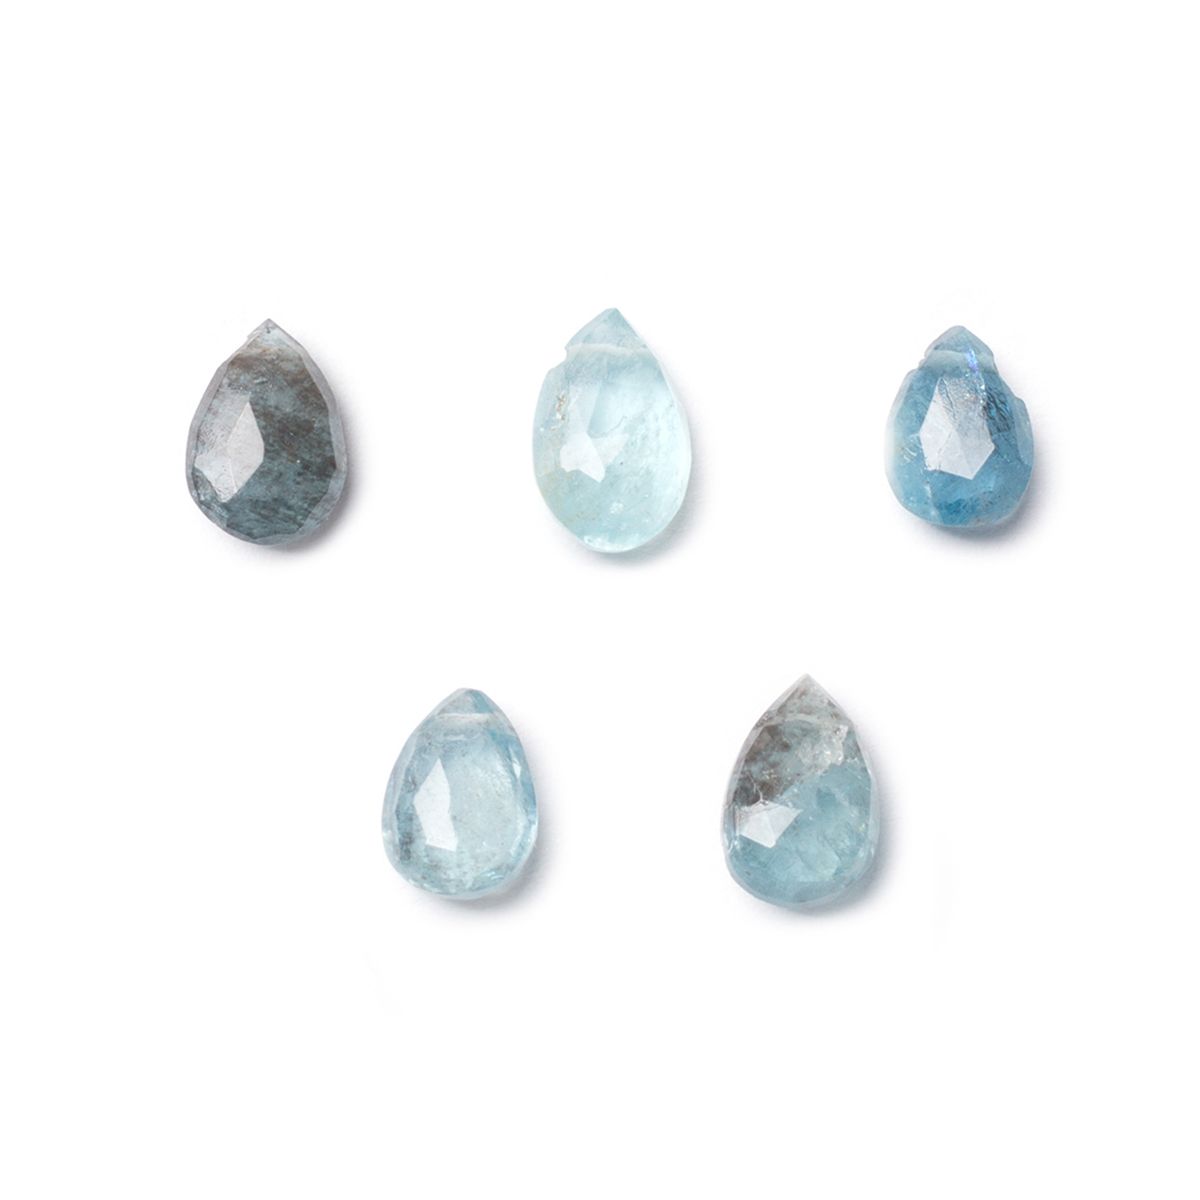 Moss Aquamarine Faceted Teardrop Briolette Beads, Approx 5x4mm To 11x6mm